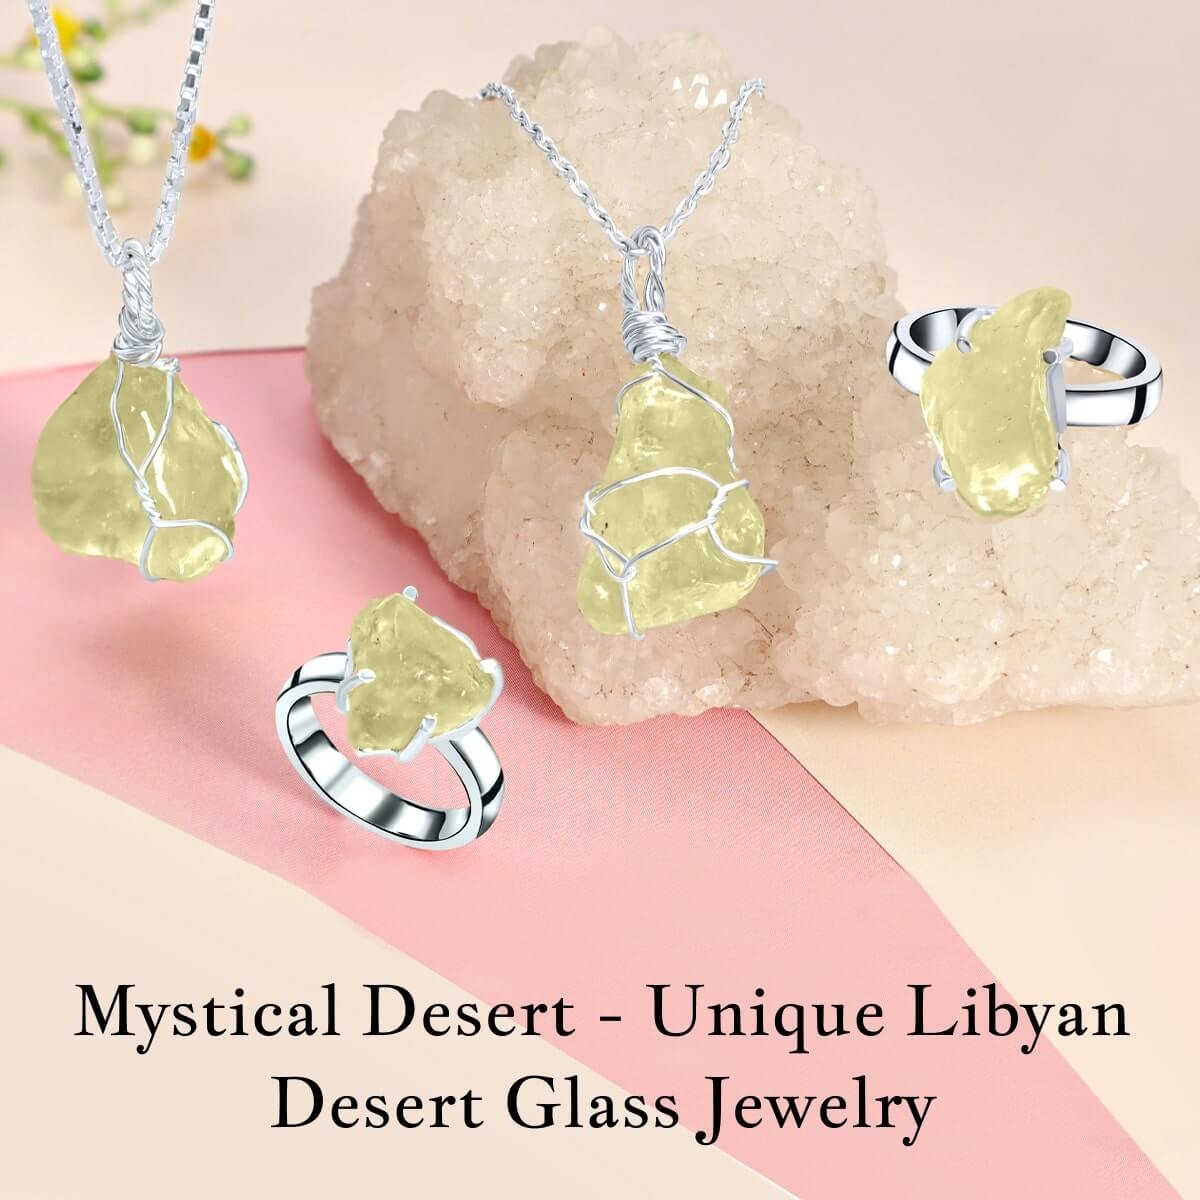 Libyan Desert Glass Stone Meaning, Healing Properties, Zodiac Signs, Origin, Uses and Price